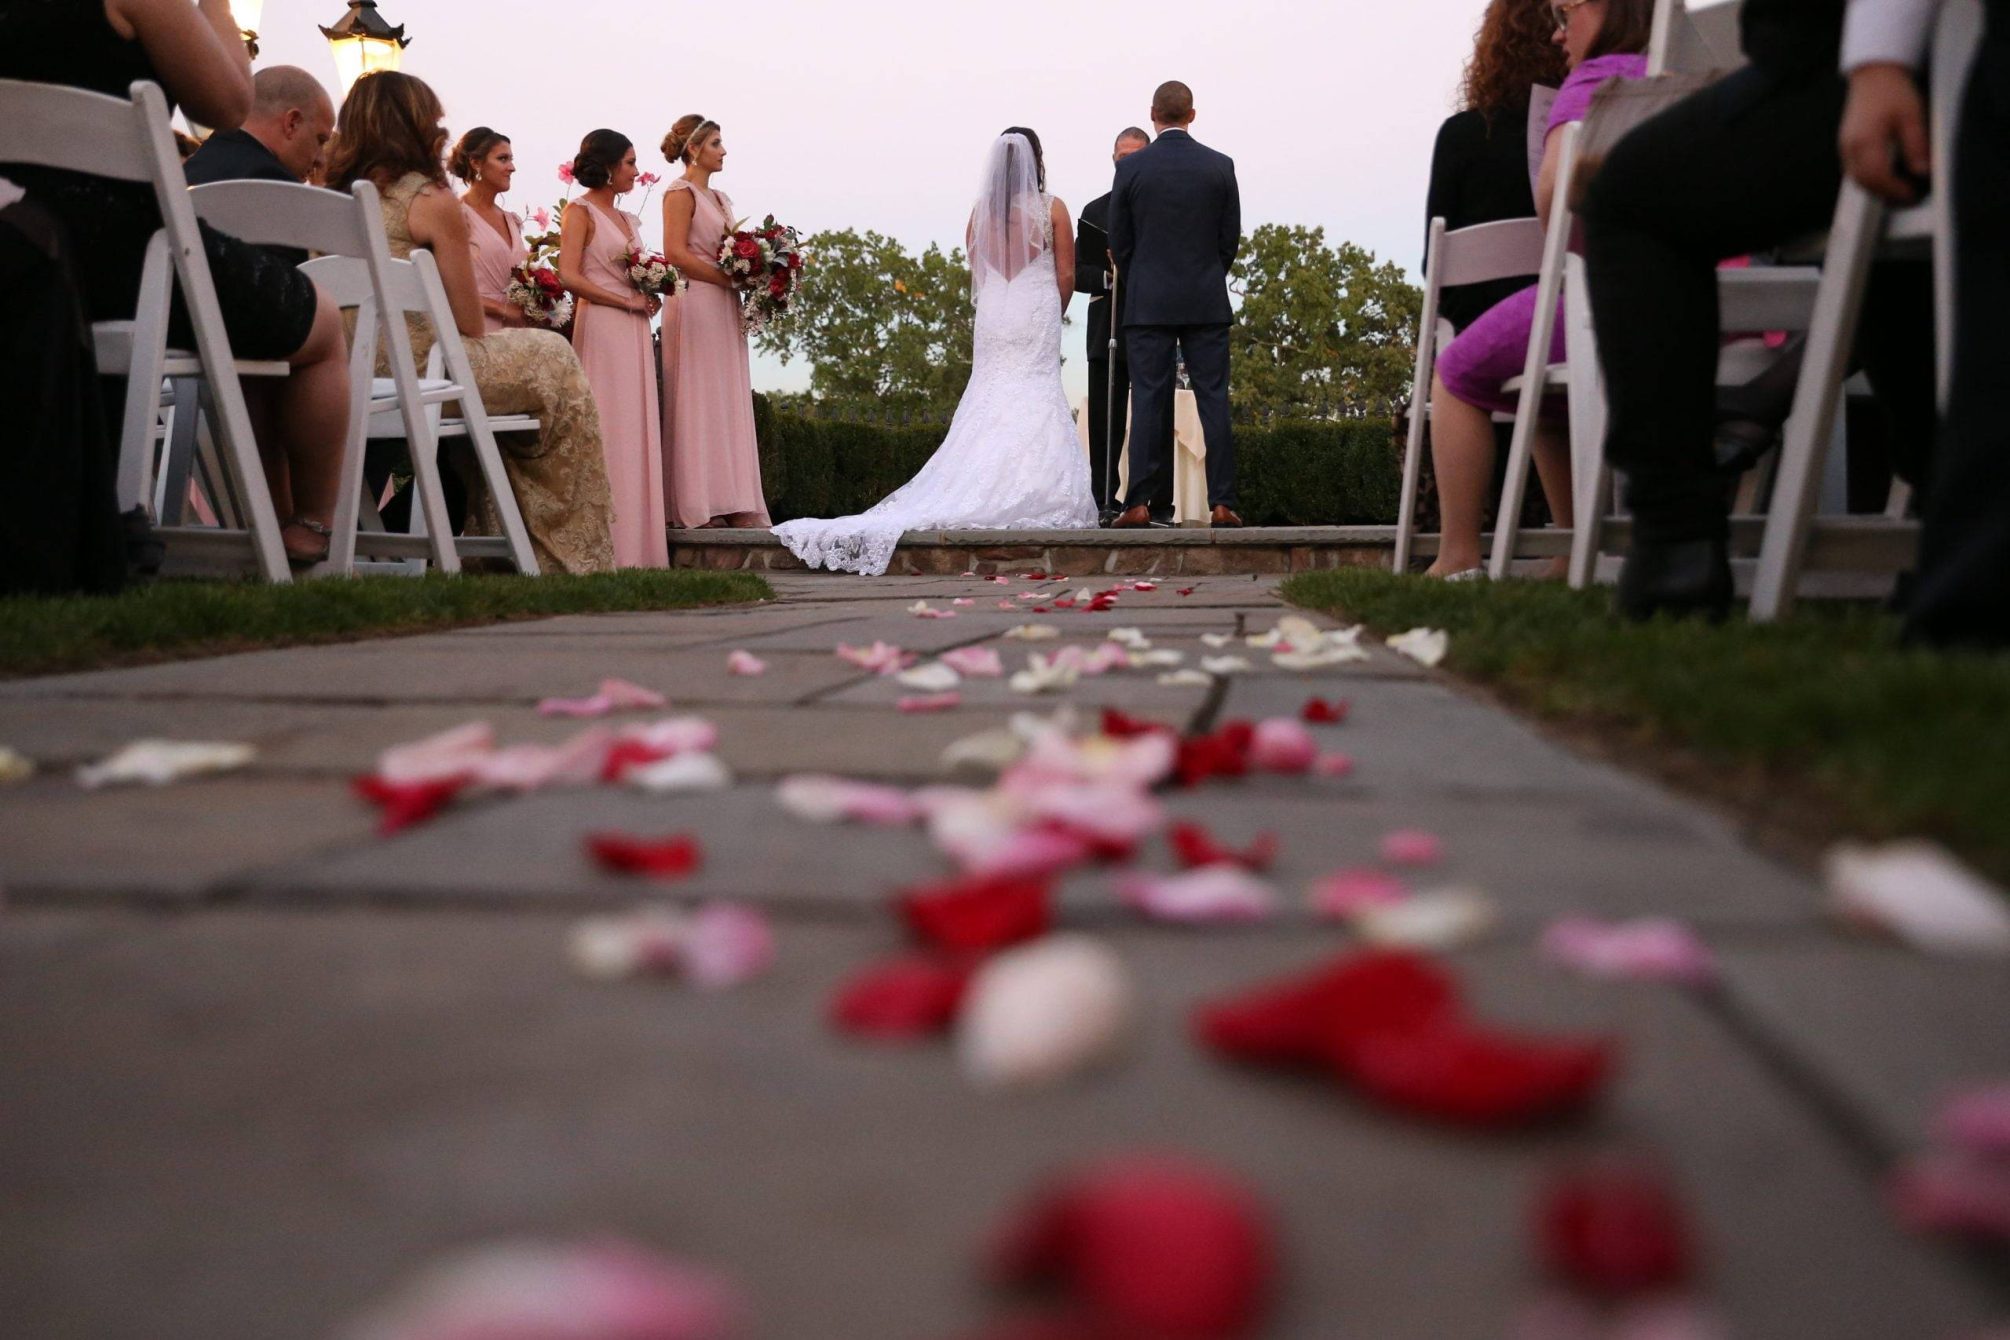 Park Savoy bride and groom with flower petals on the aisle